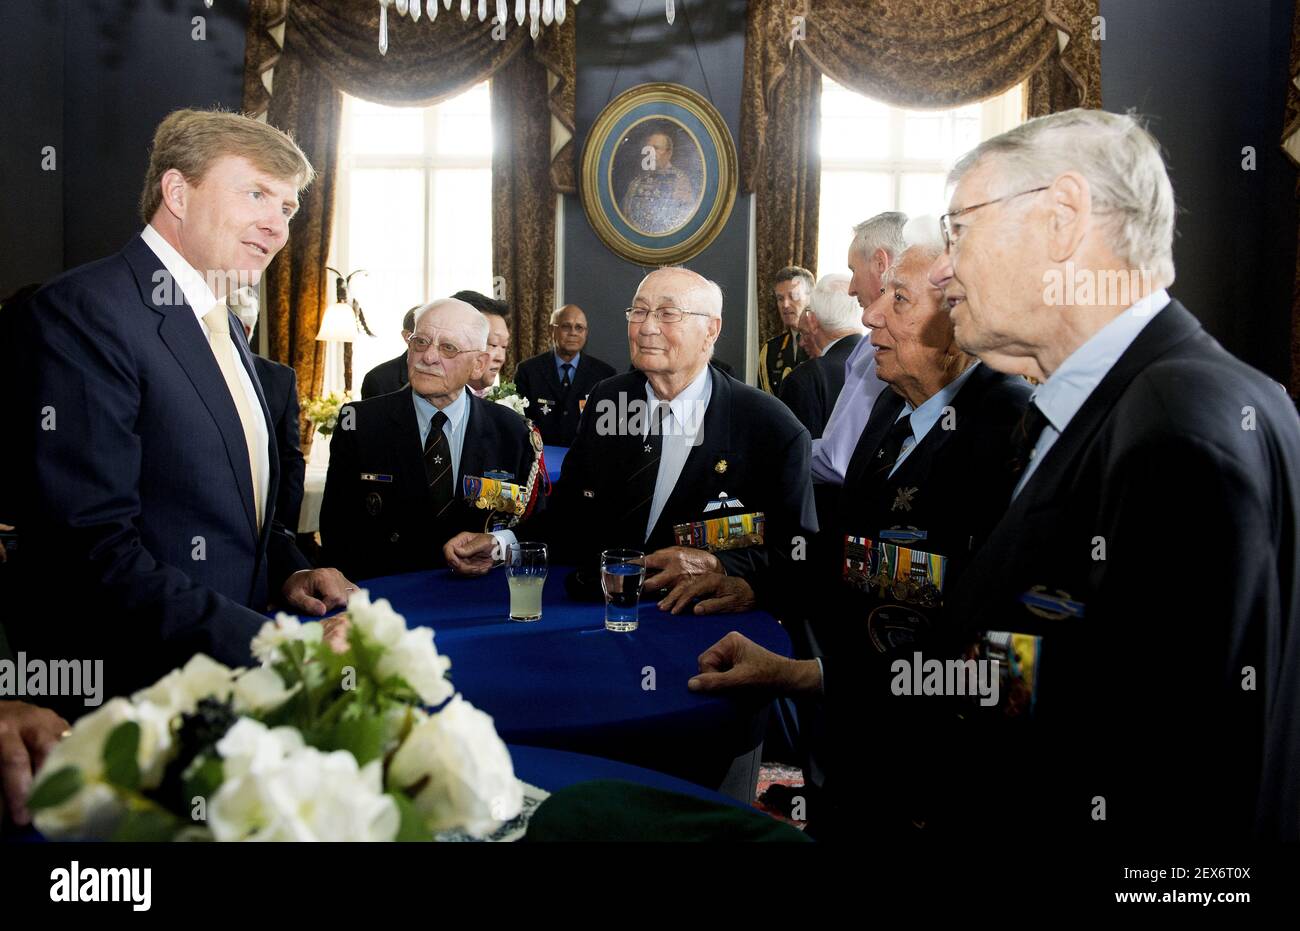 June 17, 2015 - Arnheim- King Willem Alexander attended the meeting (65) Regiment Heutsz. The King attends the ceremonial solemnity of the 'dead-appeal 'in speaking to others with Korea veterans. The meeting takes place at the Royal Home for Former Soldiers and Bronbeek Museum in Arnhem. *** Please Use Credit from Credit Field *** Stock Photo